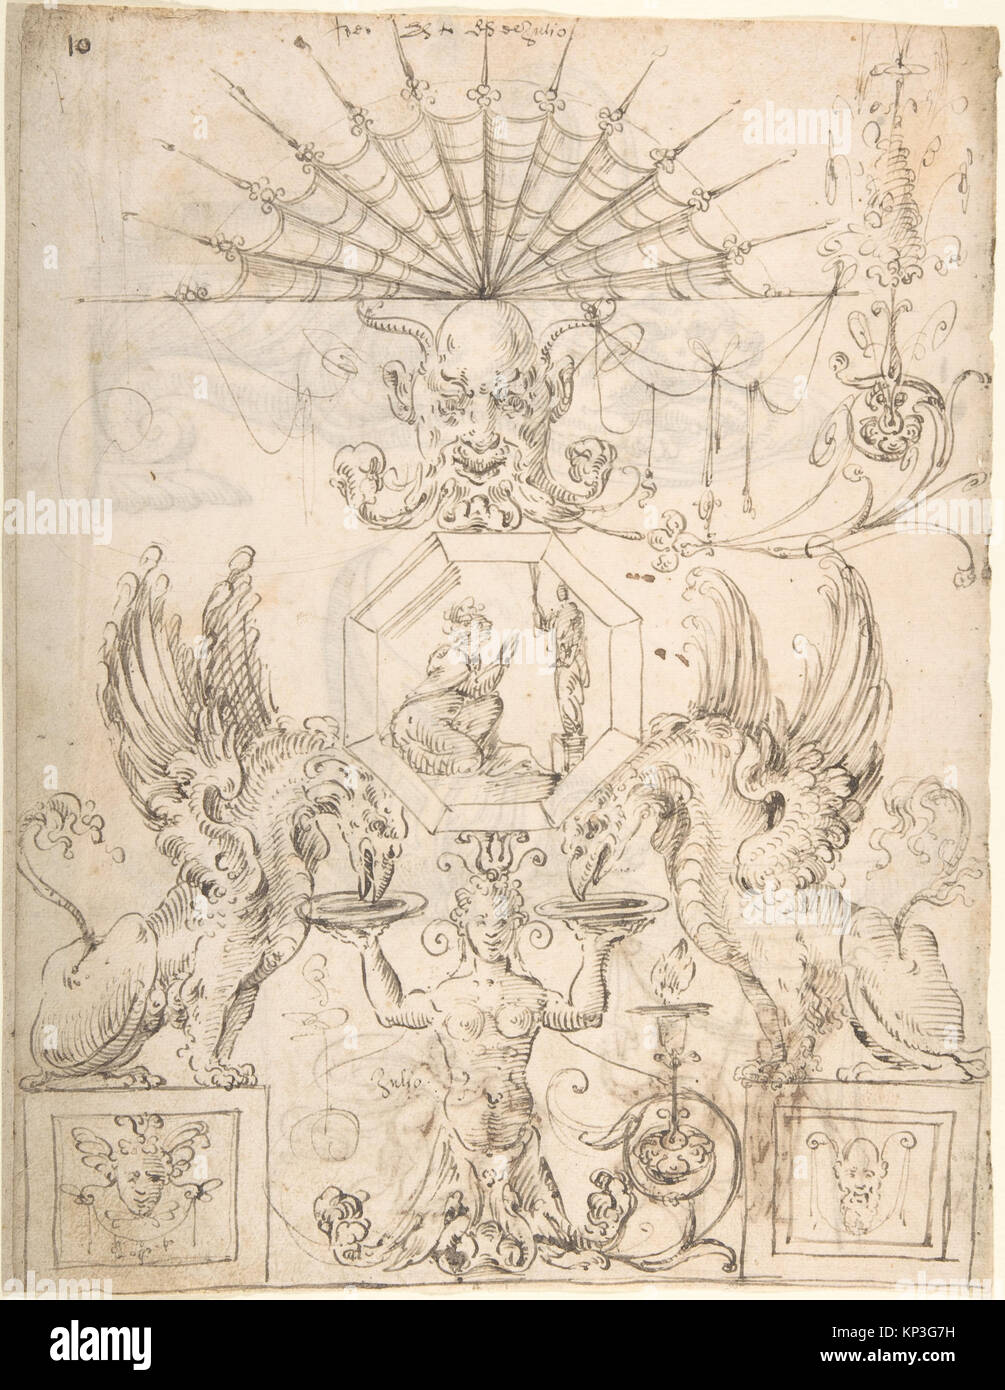 Grotesque Design with an Octagonal Panel in the Center and Two Griffins Drinking from PLates held up by a Hybrid Creature (recto); Two Turtles above a Scene with Four Figures (verso) MET DP800320 337501 Stock Photo